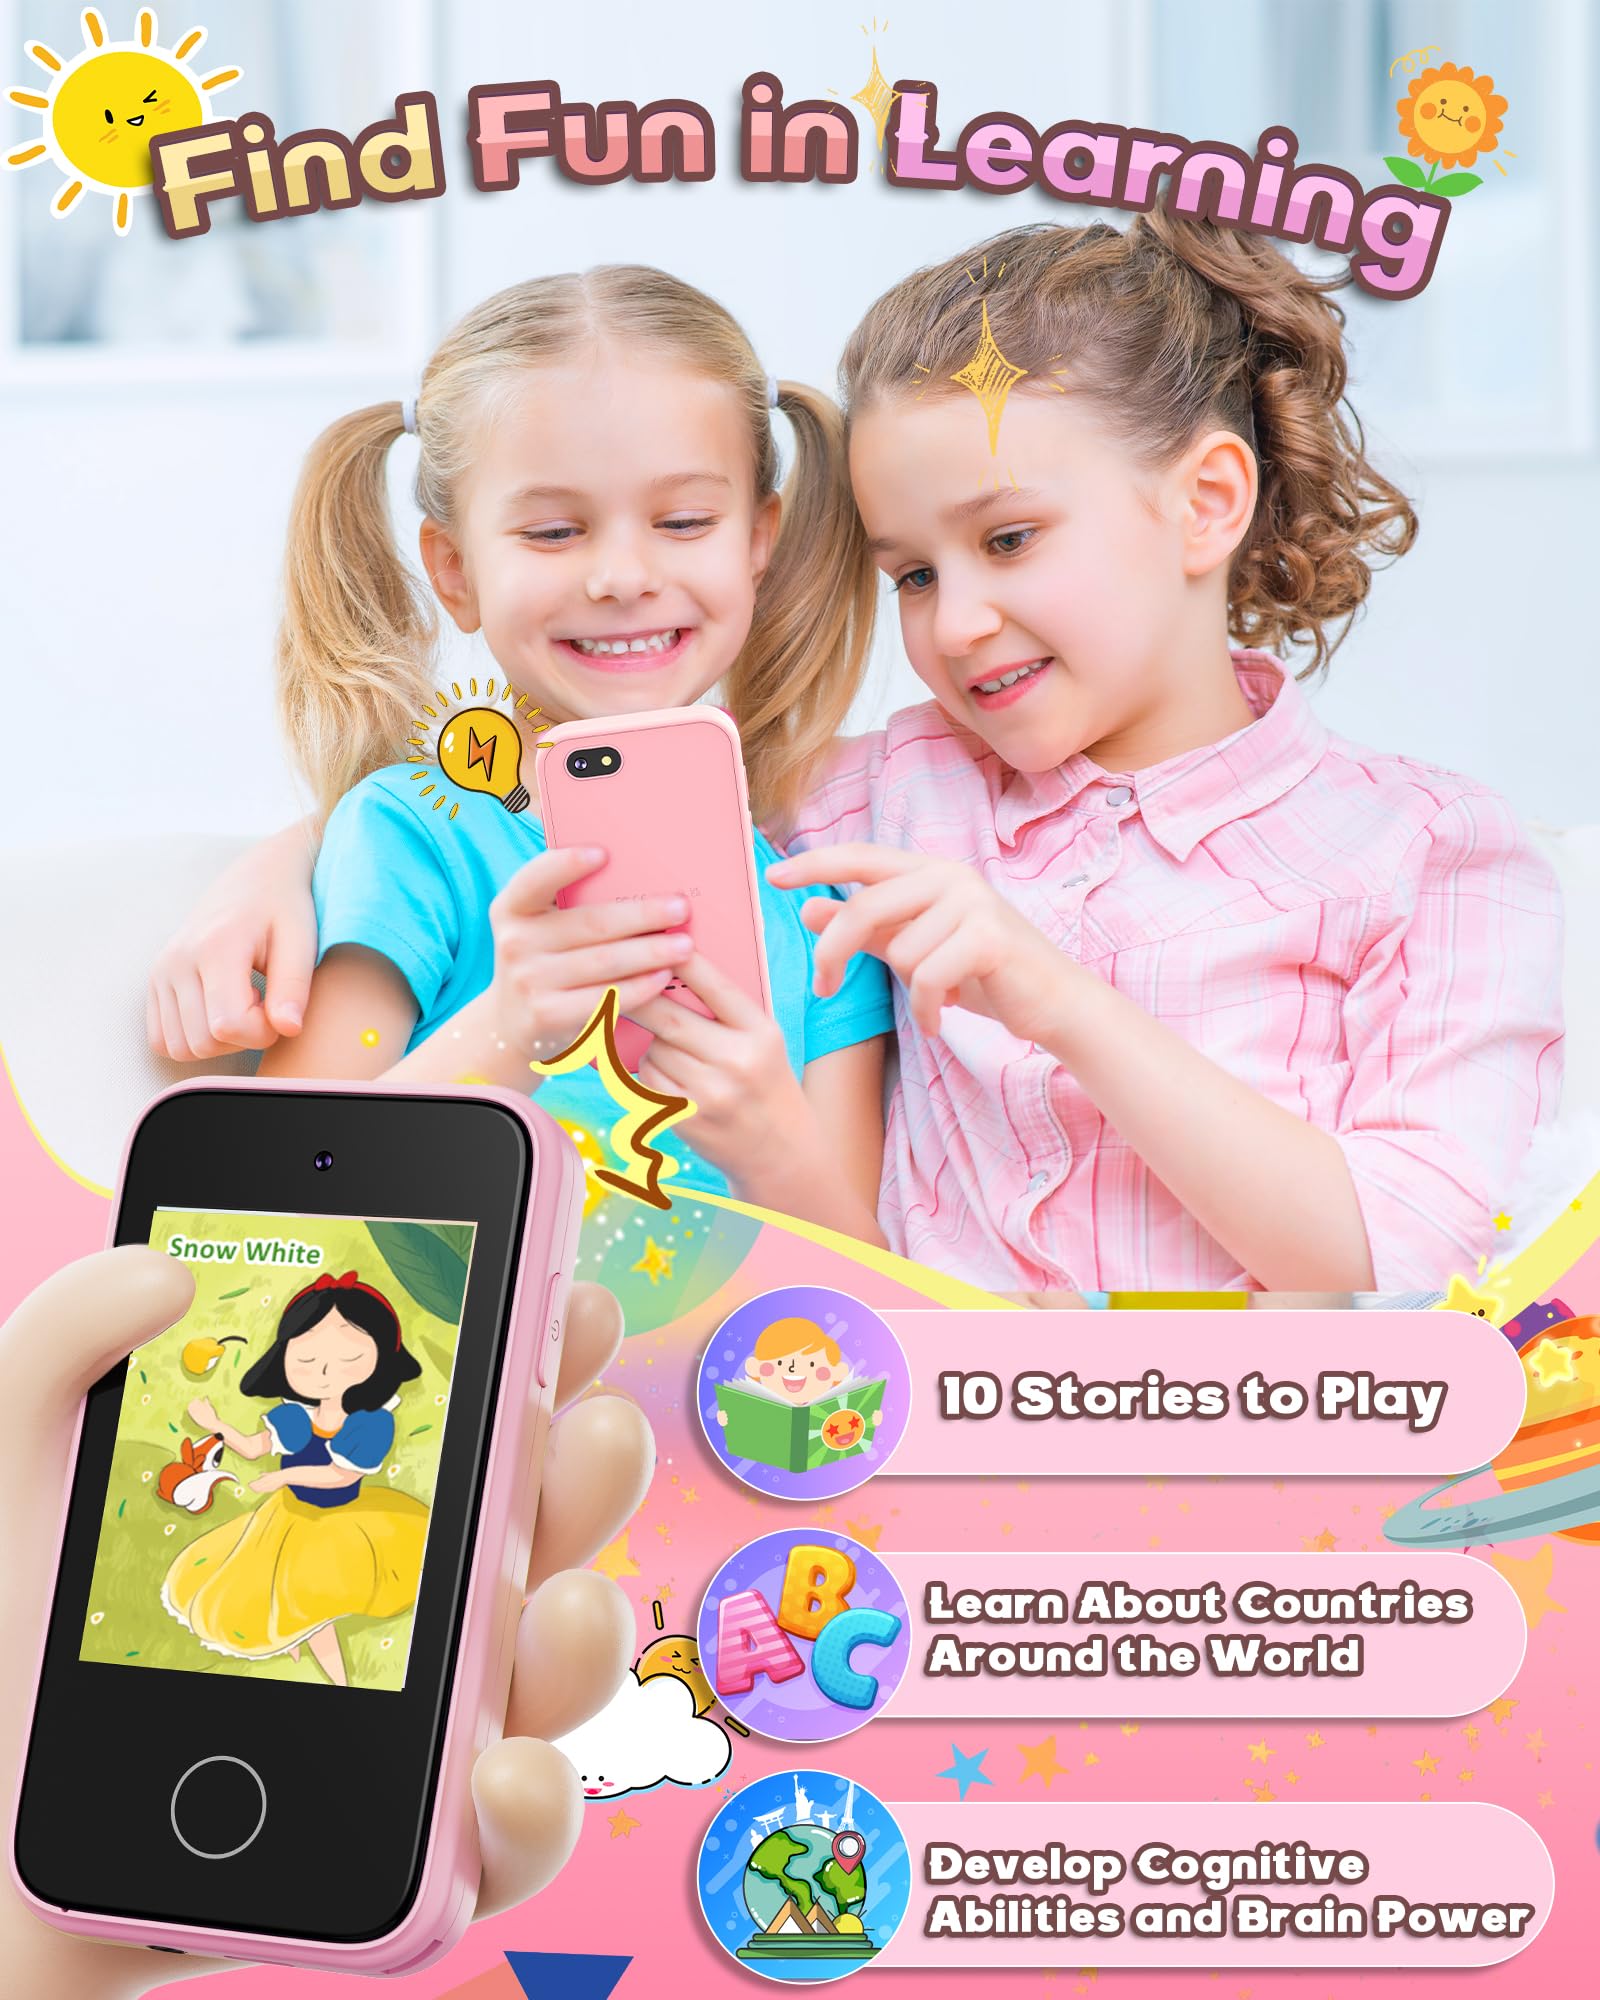 shiningstone Kids Toddler Phone Toys for Girls Boys Age 3-7, MP3 Music Player with Dual Camera, for for Girls Boys